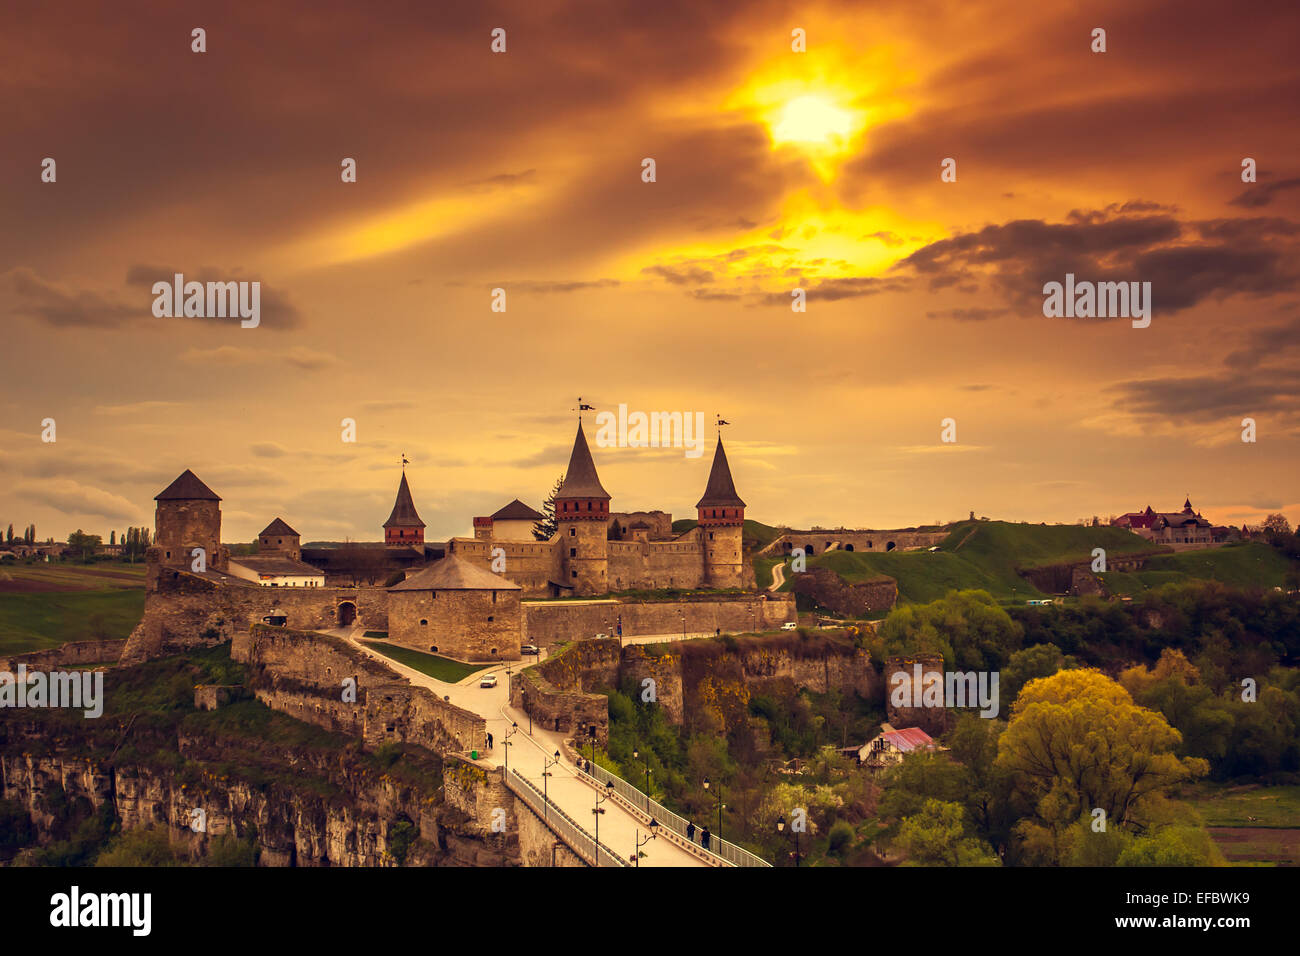 Château Kamianets-Podilskyi Banque D'Images